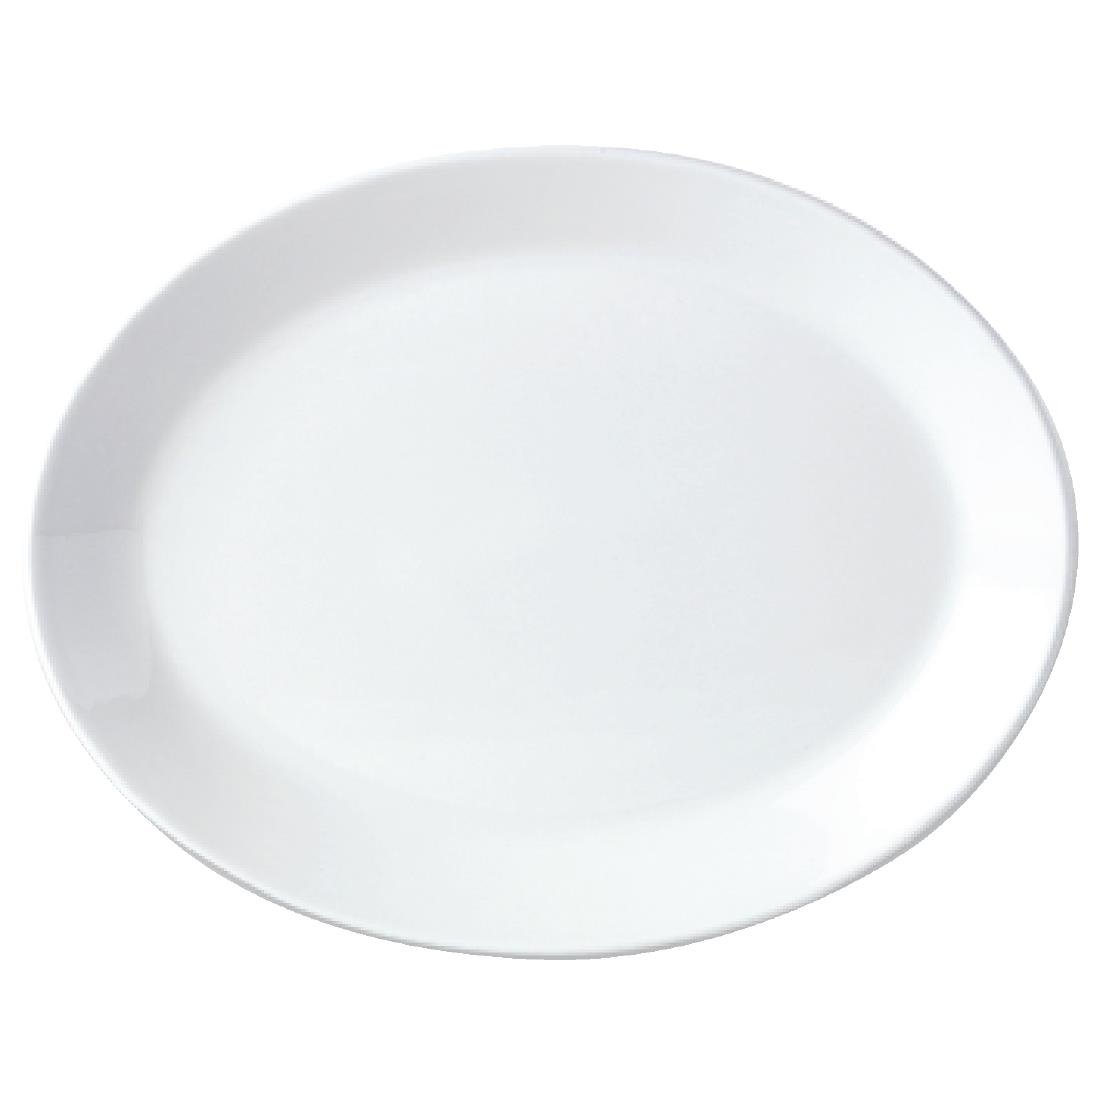 V0029 Steelite Simplicity White Oval Coupe Dishes 305mm (Pack of 12)